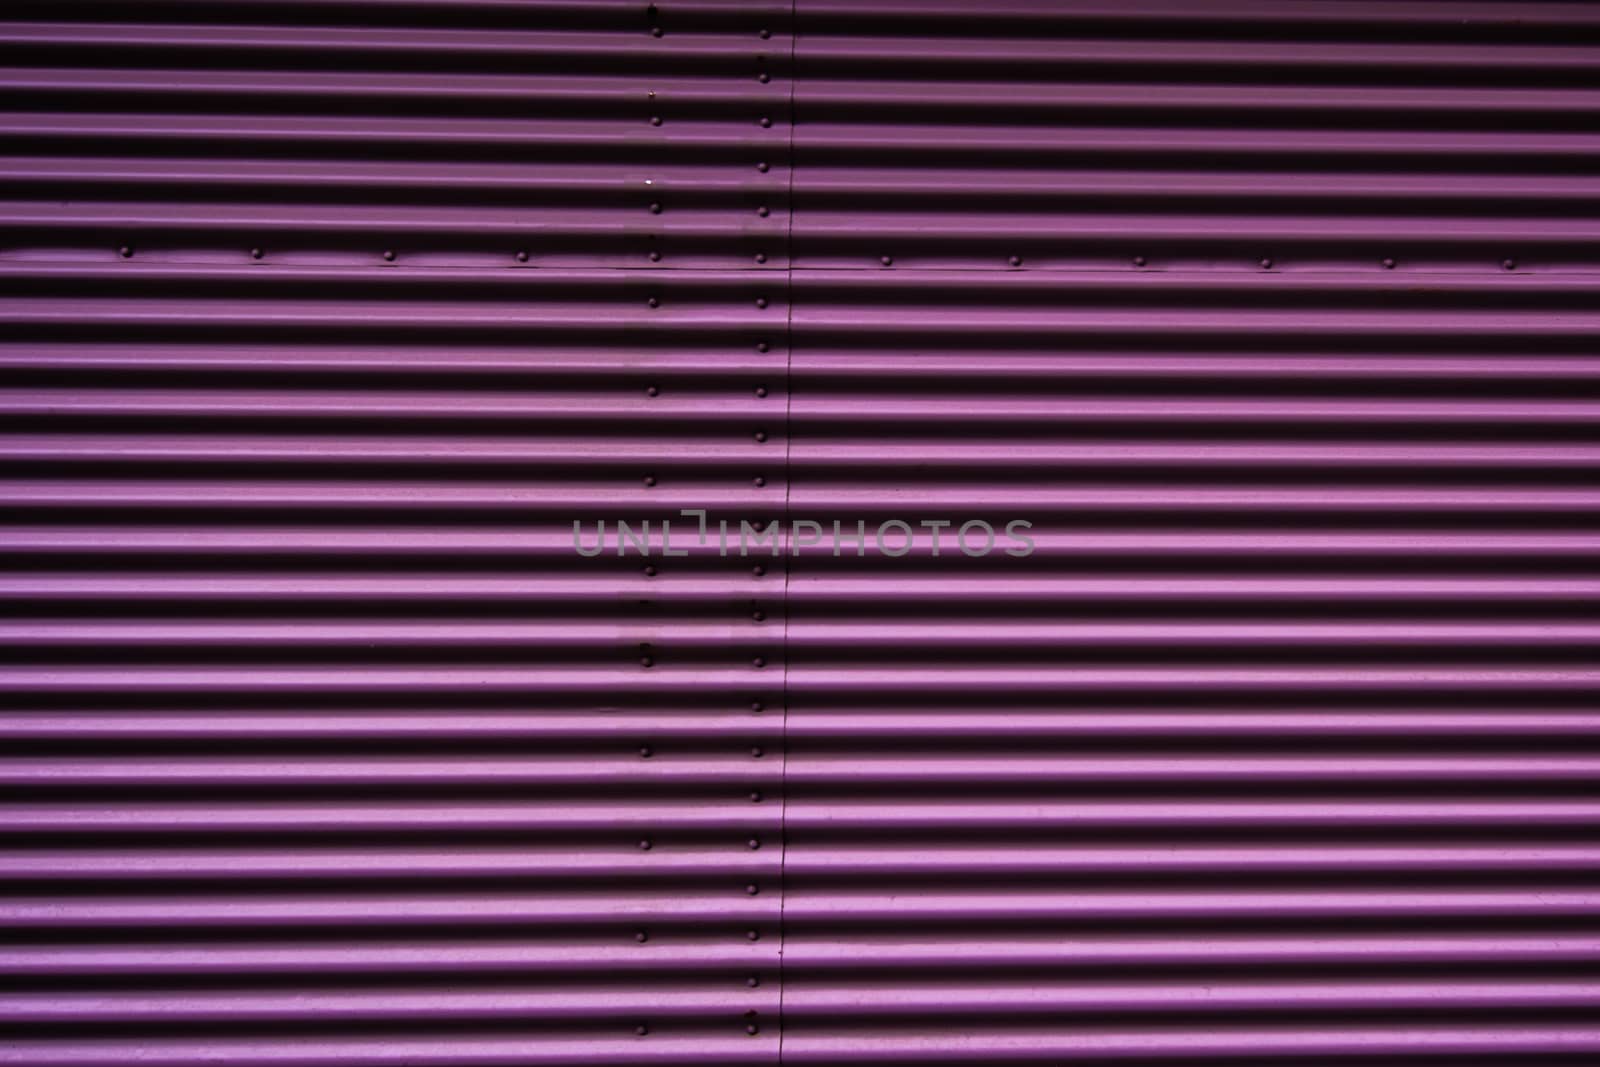 Abstract of a metal entrance in pink or purple colors by gonzalobell